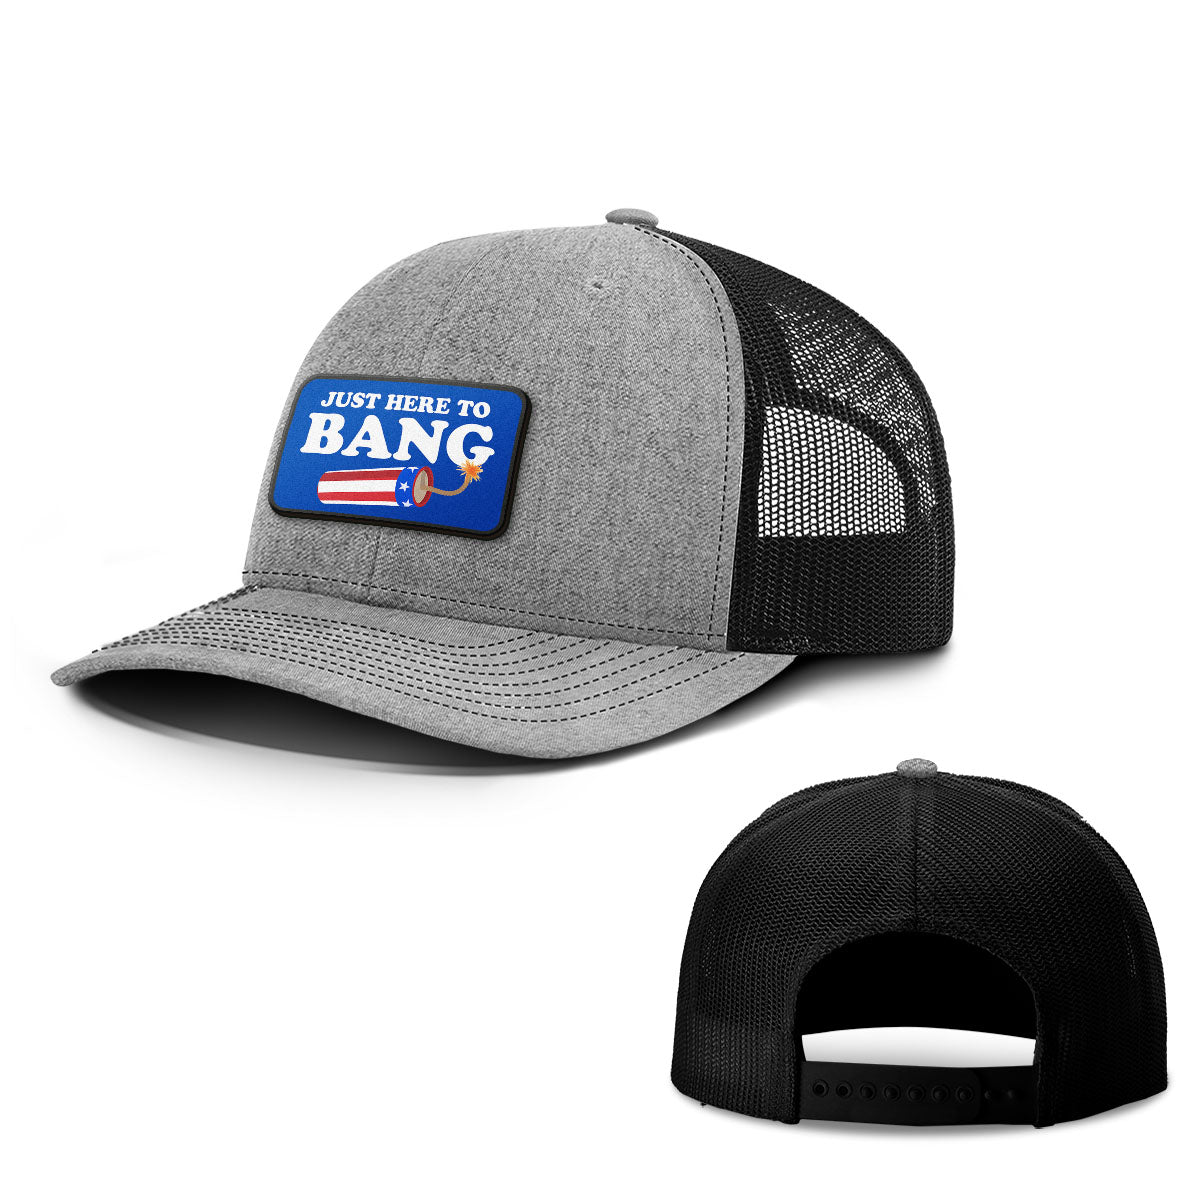 Just Here To Bang Patch Hats